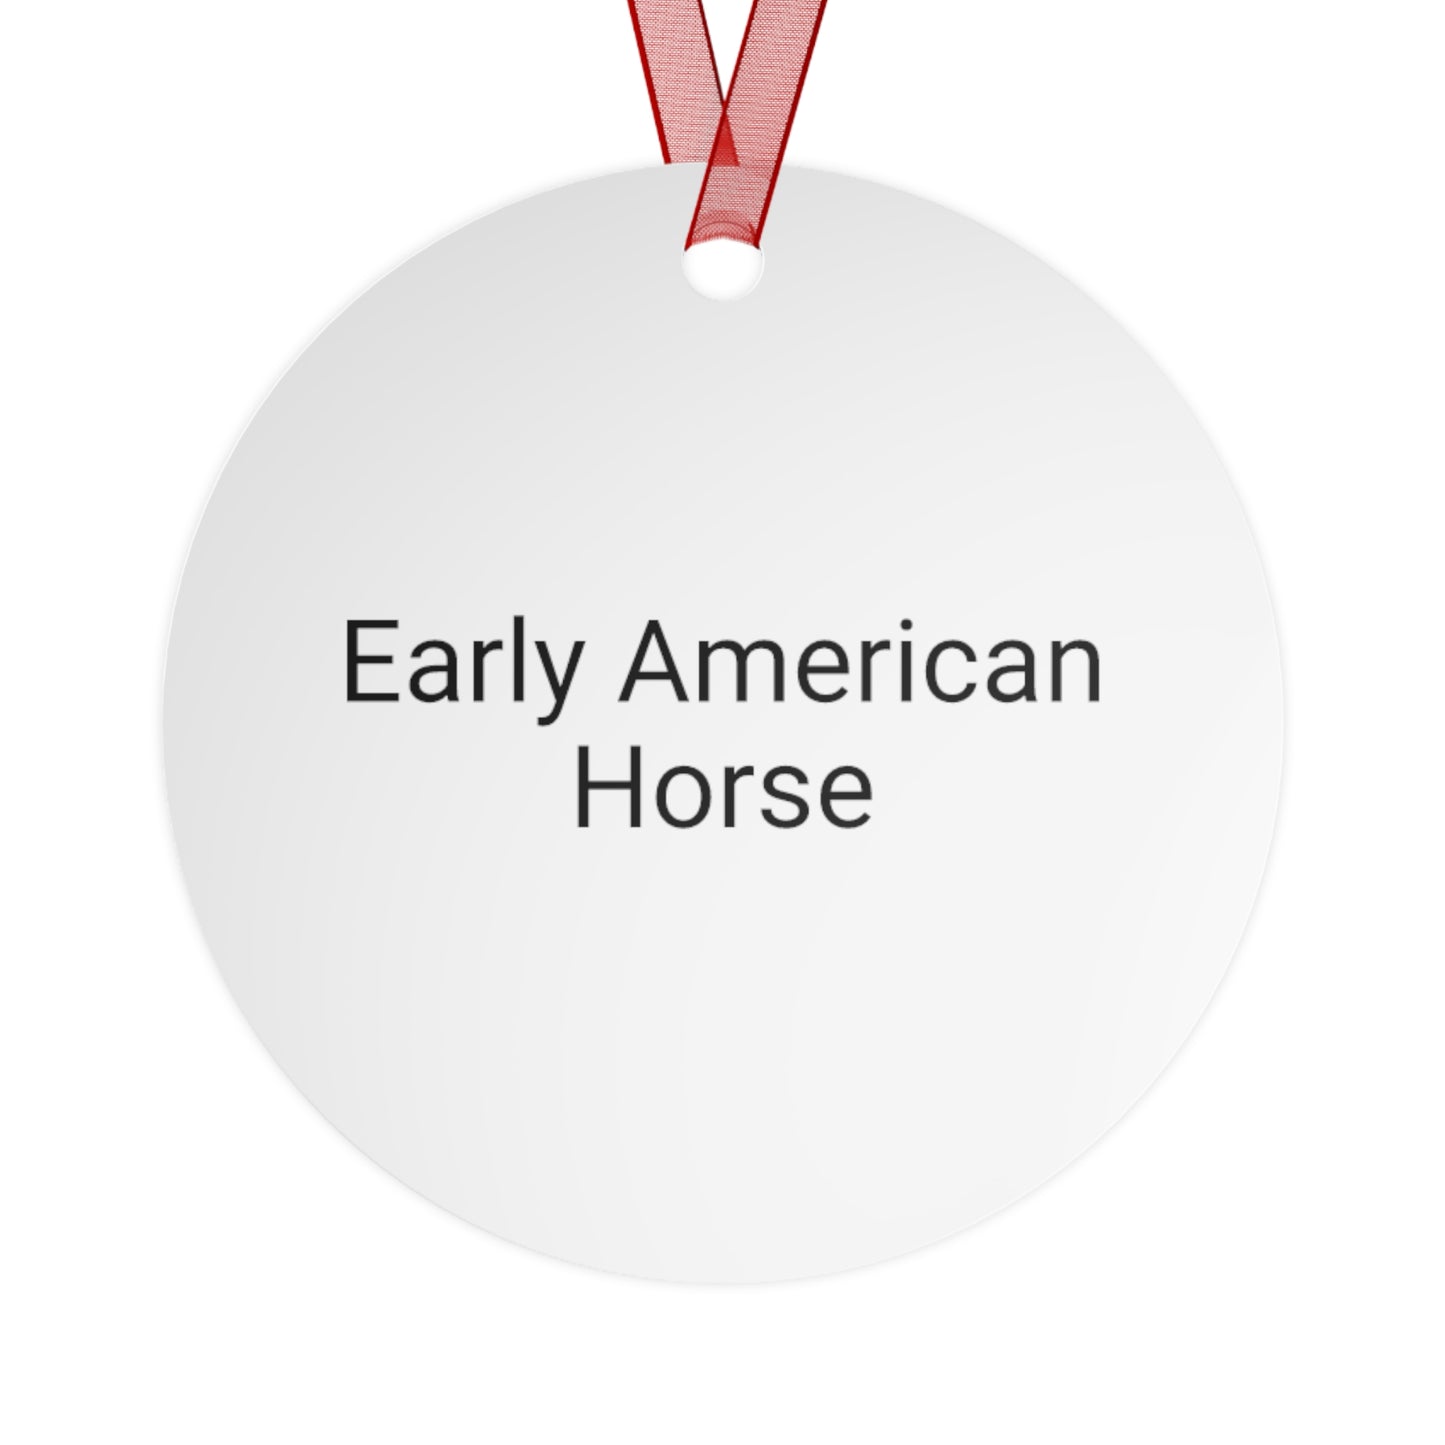 Early American Horse